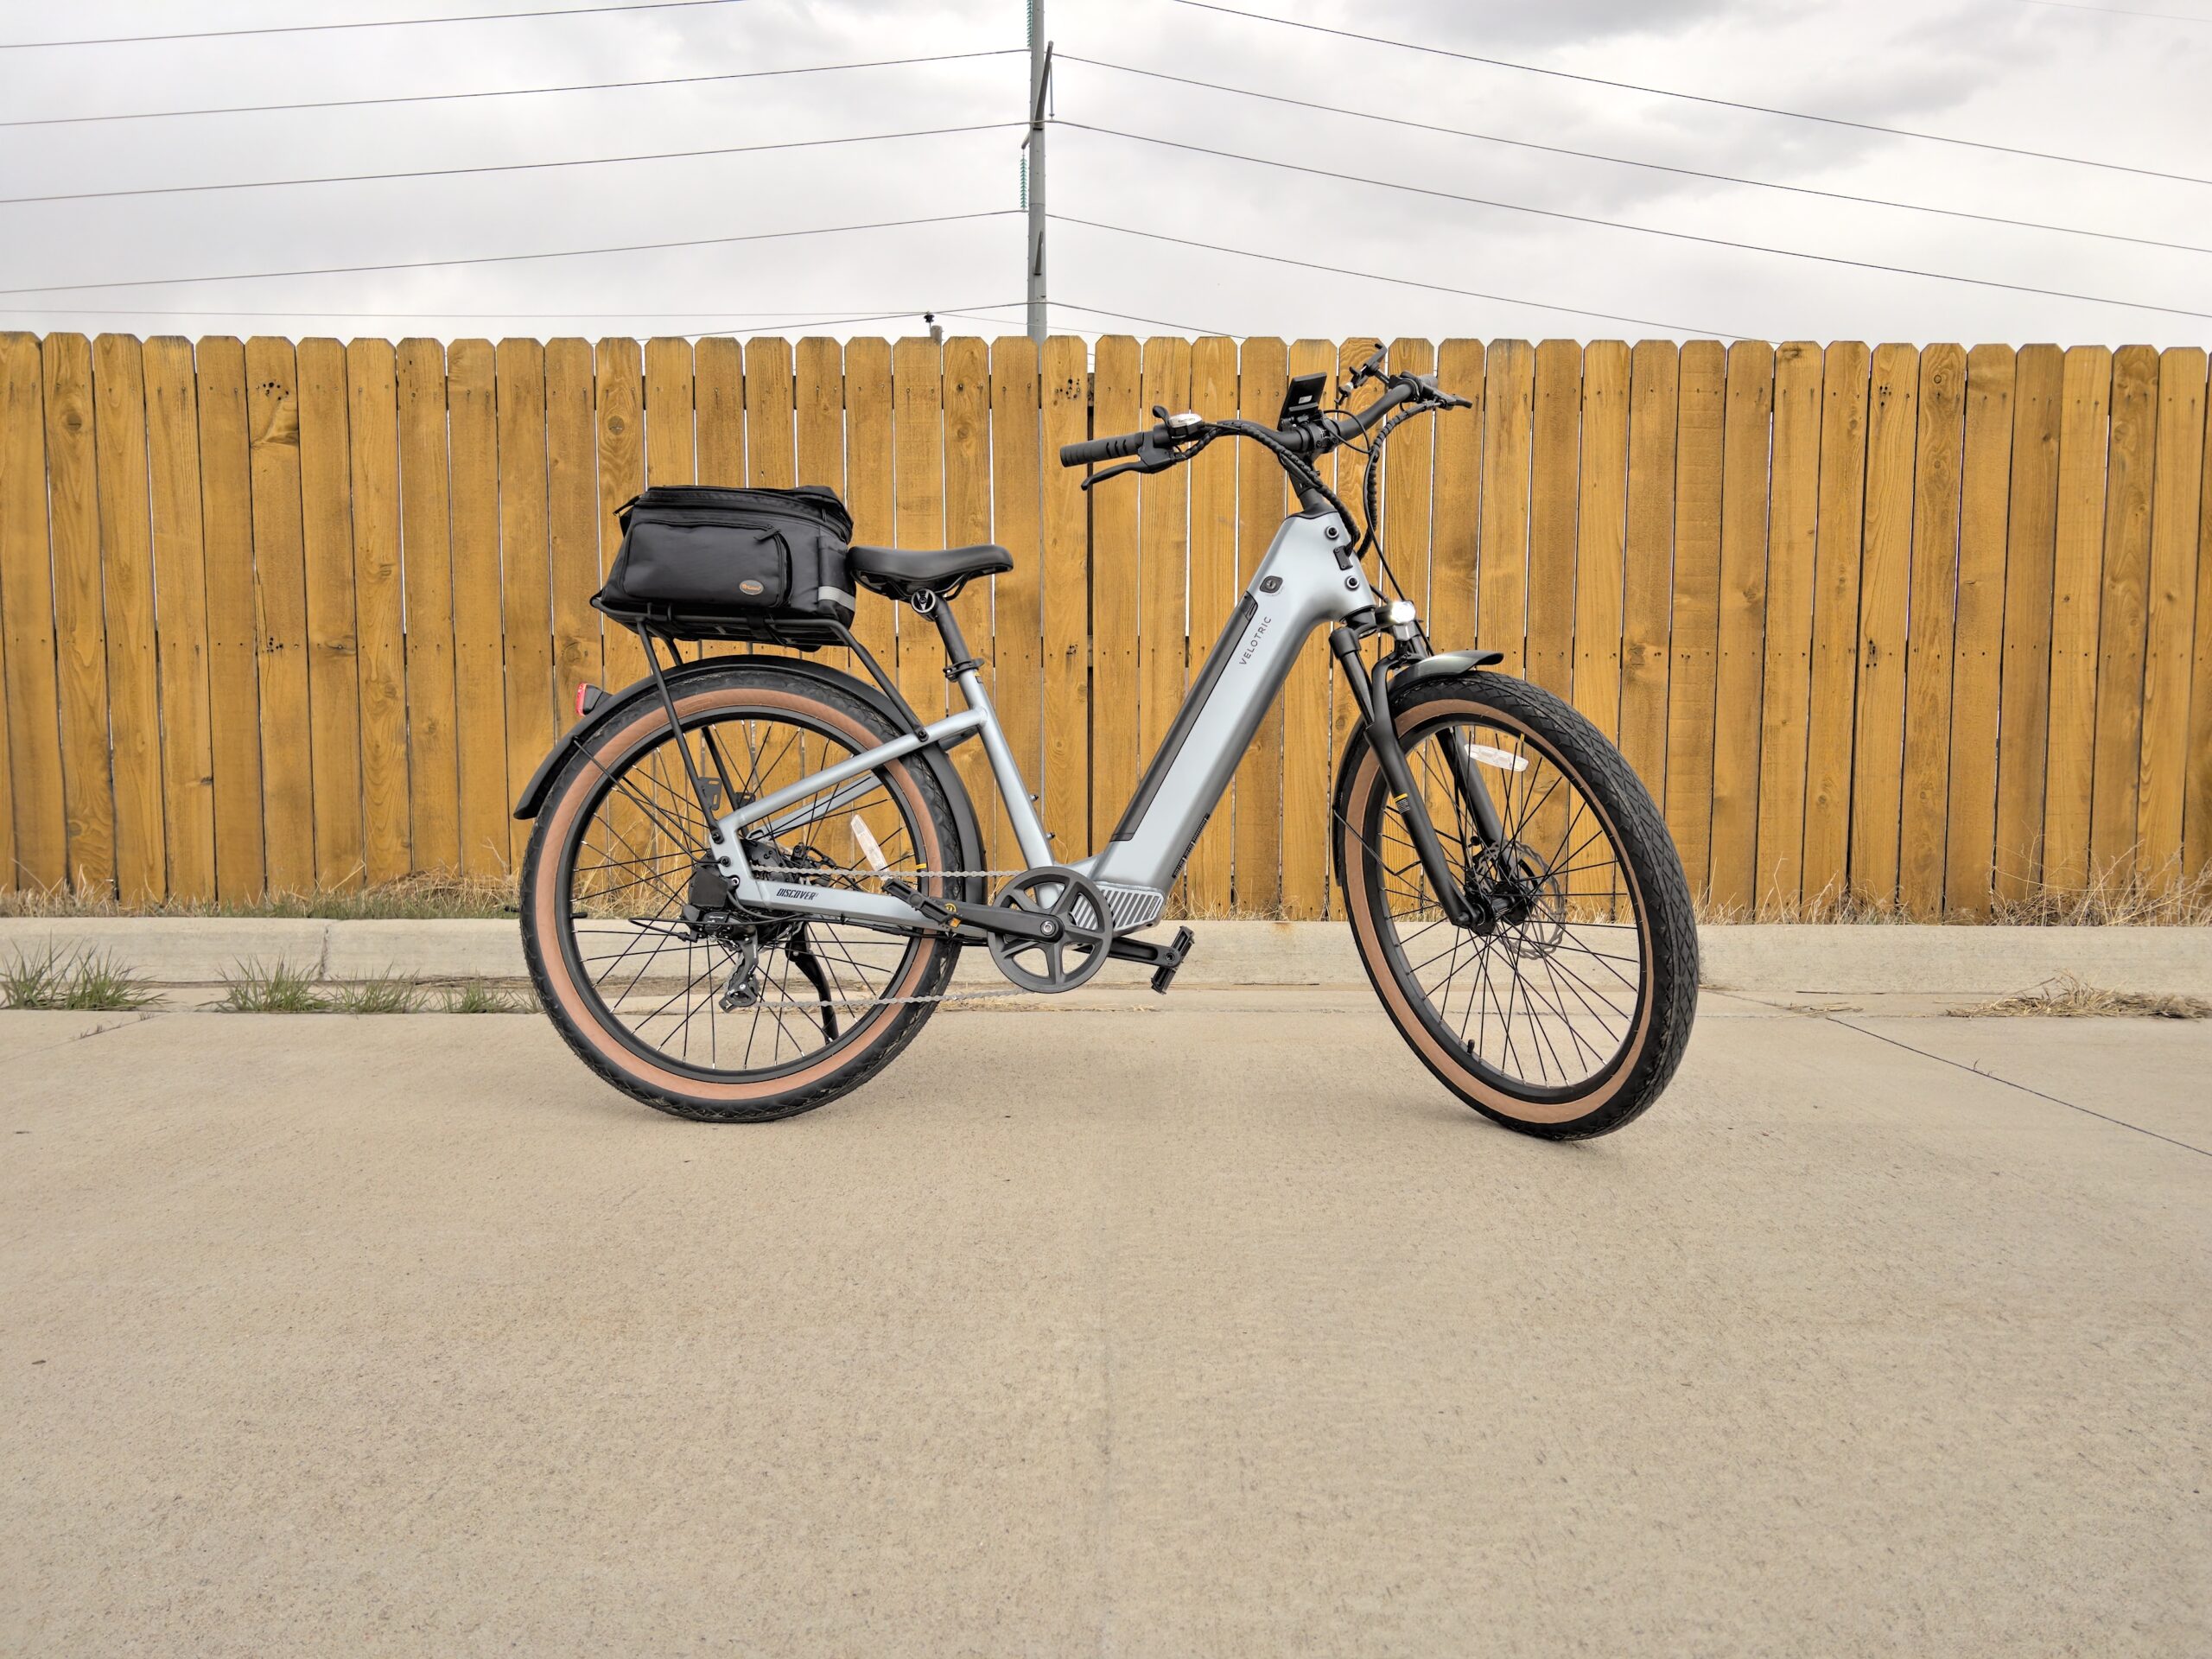 Velotric Review - One of the best-looking e-bikes on the market 2